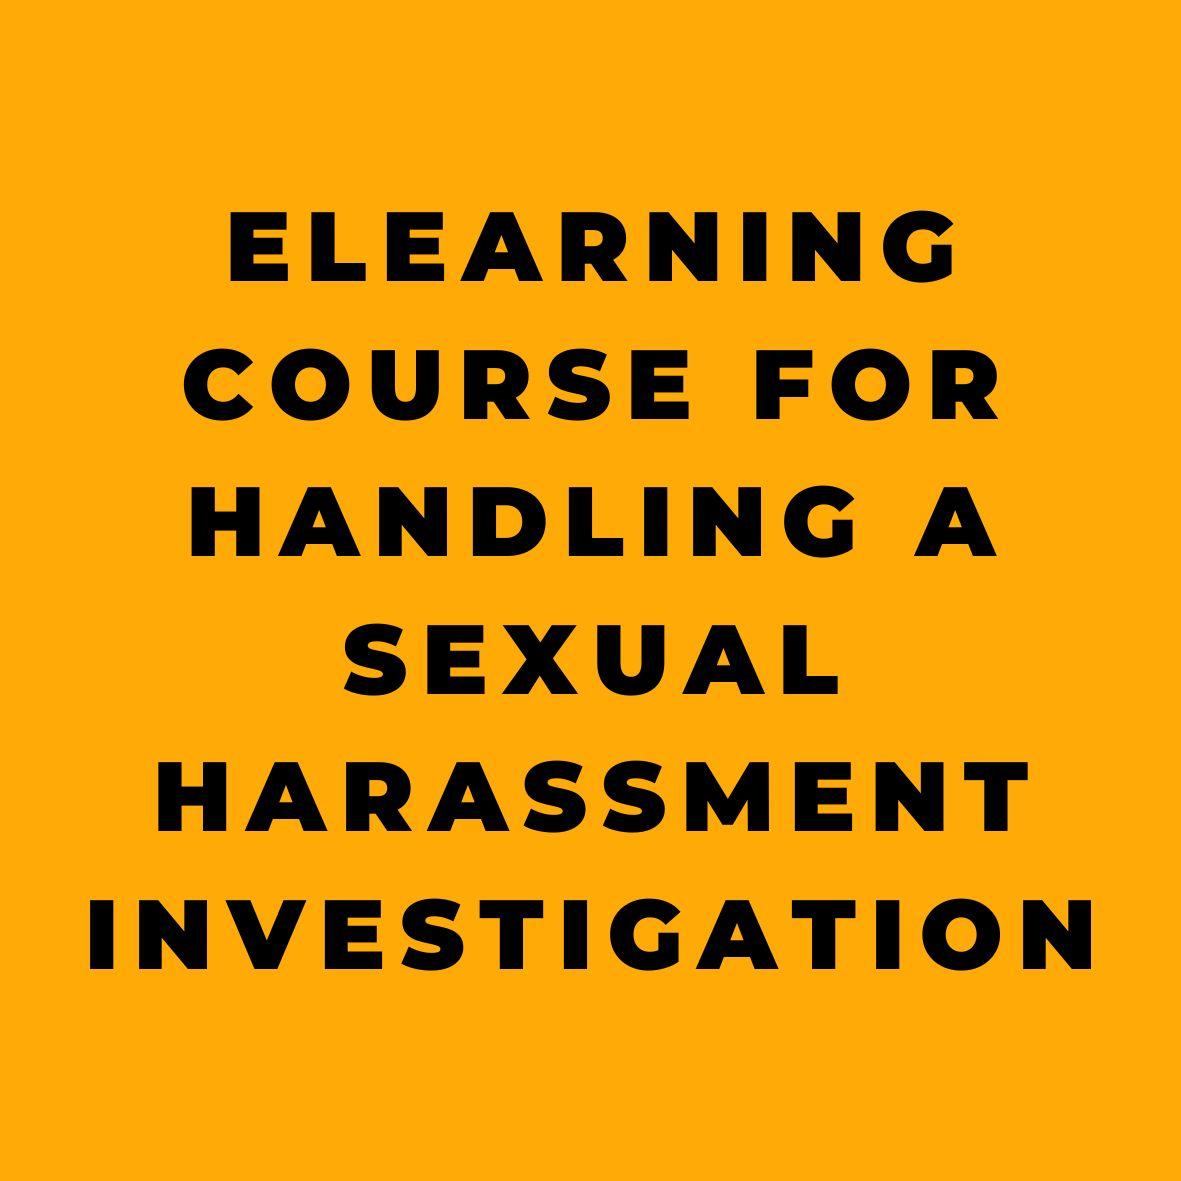 eLearning Course for Handling a Sexual Harassment Investigation